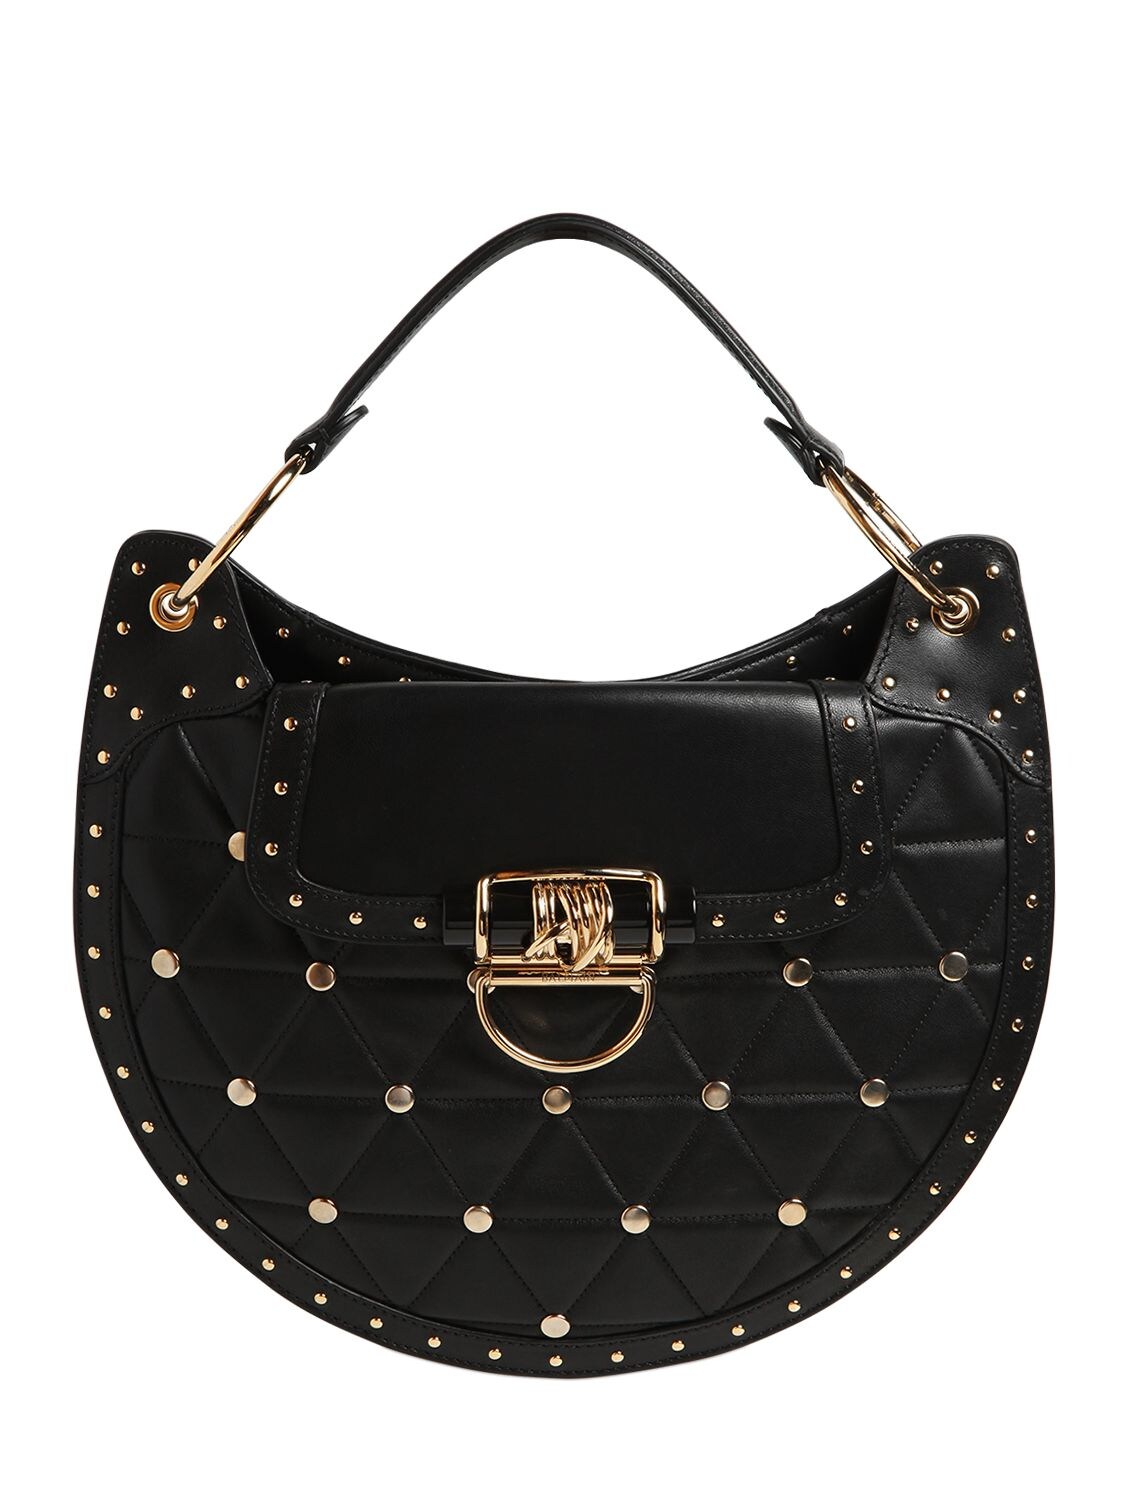 MEDIUM QUILTED LEATHER BAG W/ STUDS